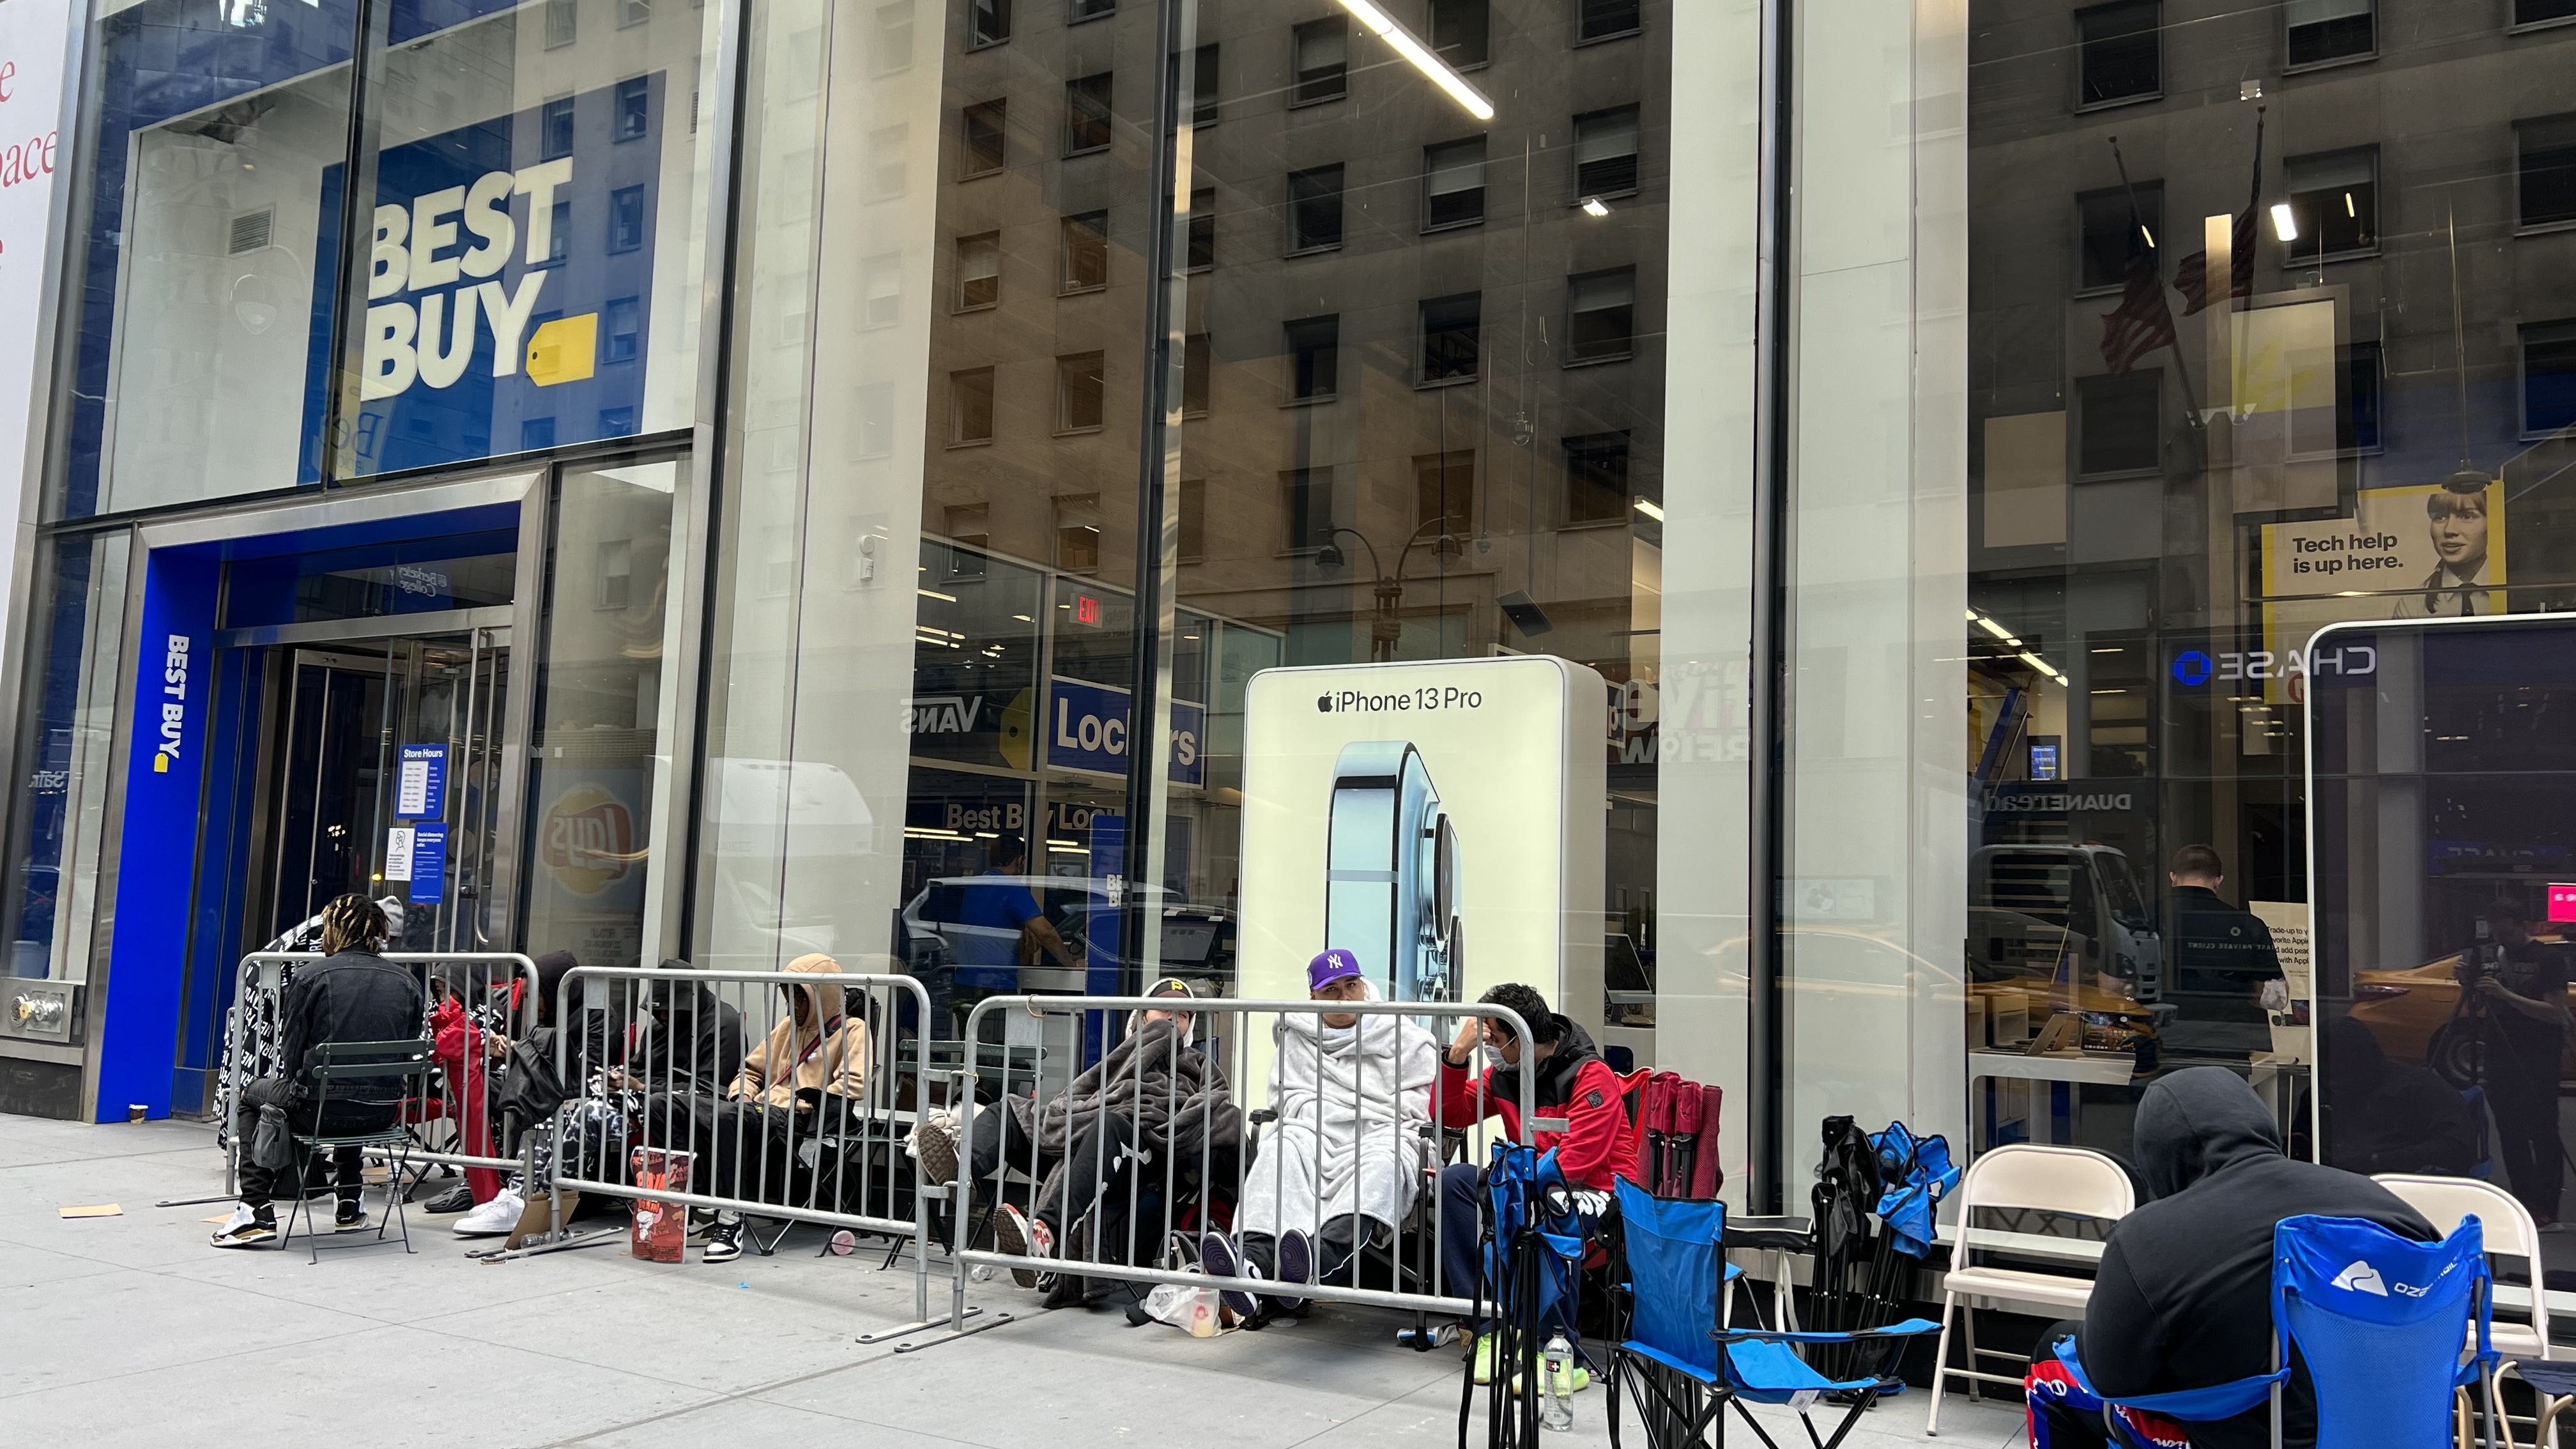 People in New York City lining up to get a new graphics card from Best Buy